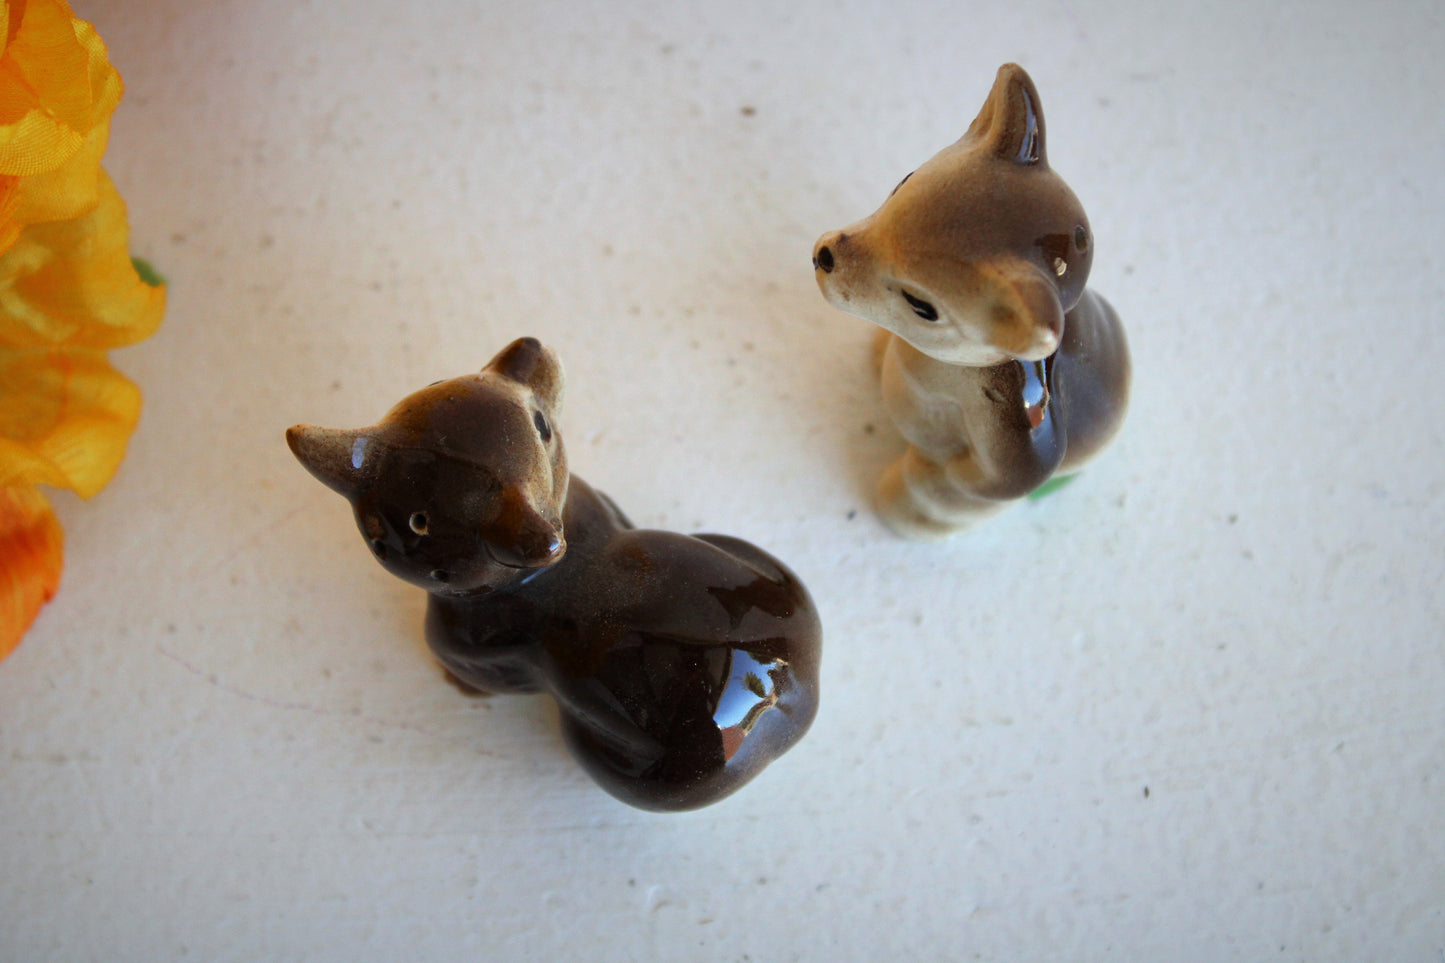 Vintage 1940s Bear Salt and Pepper Shakers From Japan